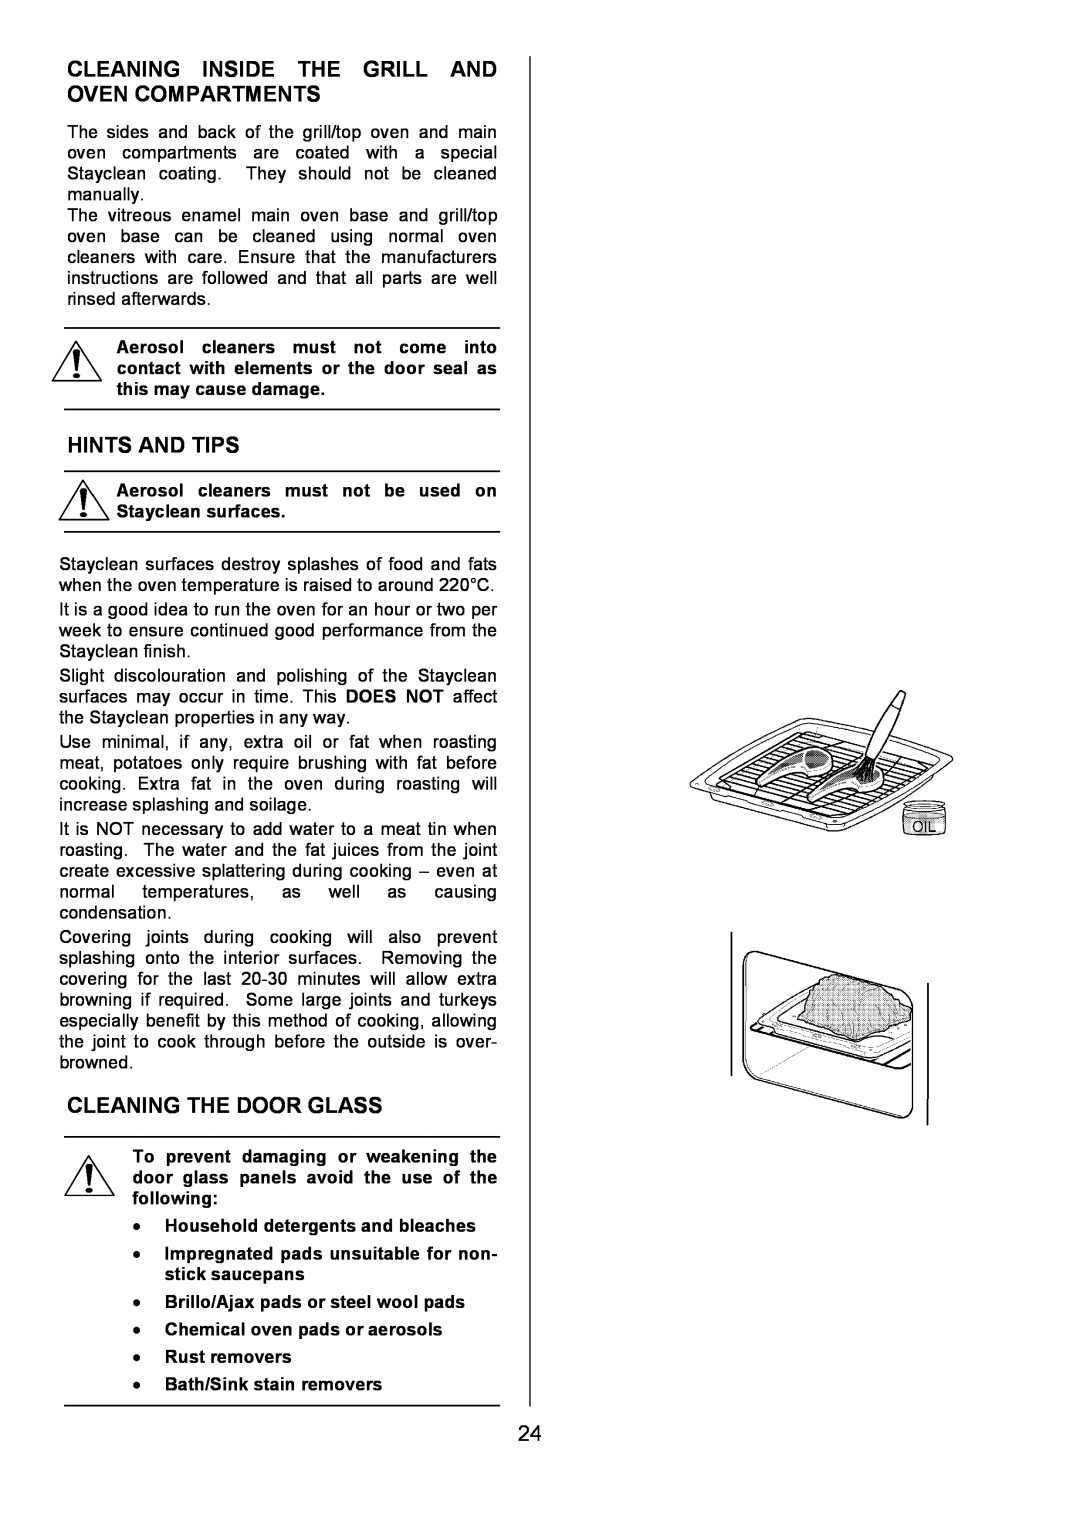 Zanussi ZCE 7680, ZCE 7690 manual Cleaning Inside The Grill And Oven Compartments, Cleaning The Door Glass, Hints And Tips 